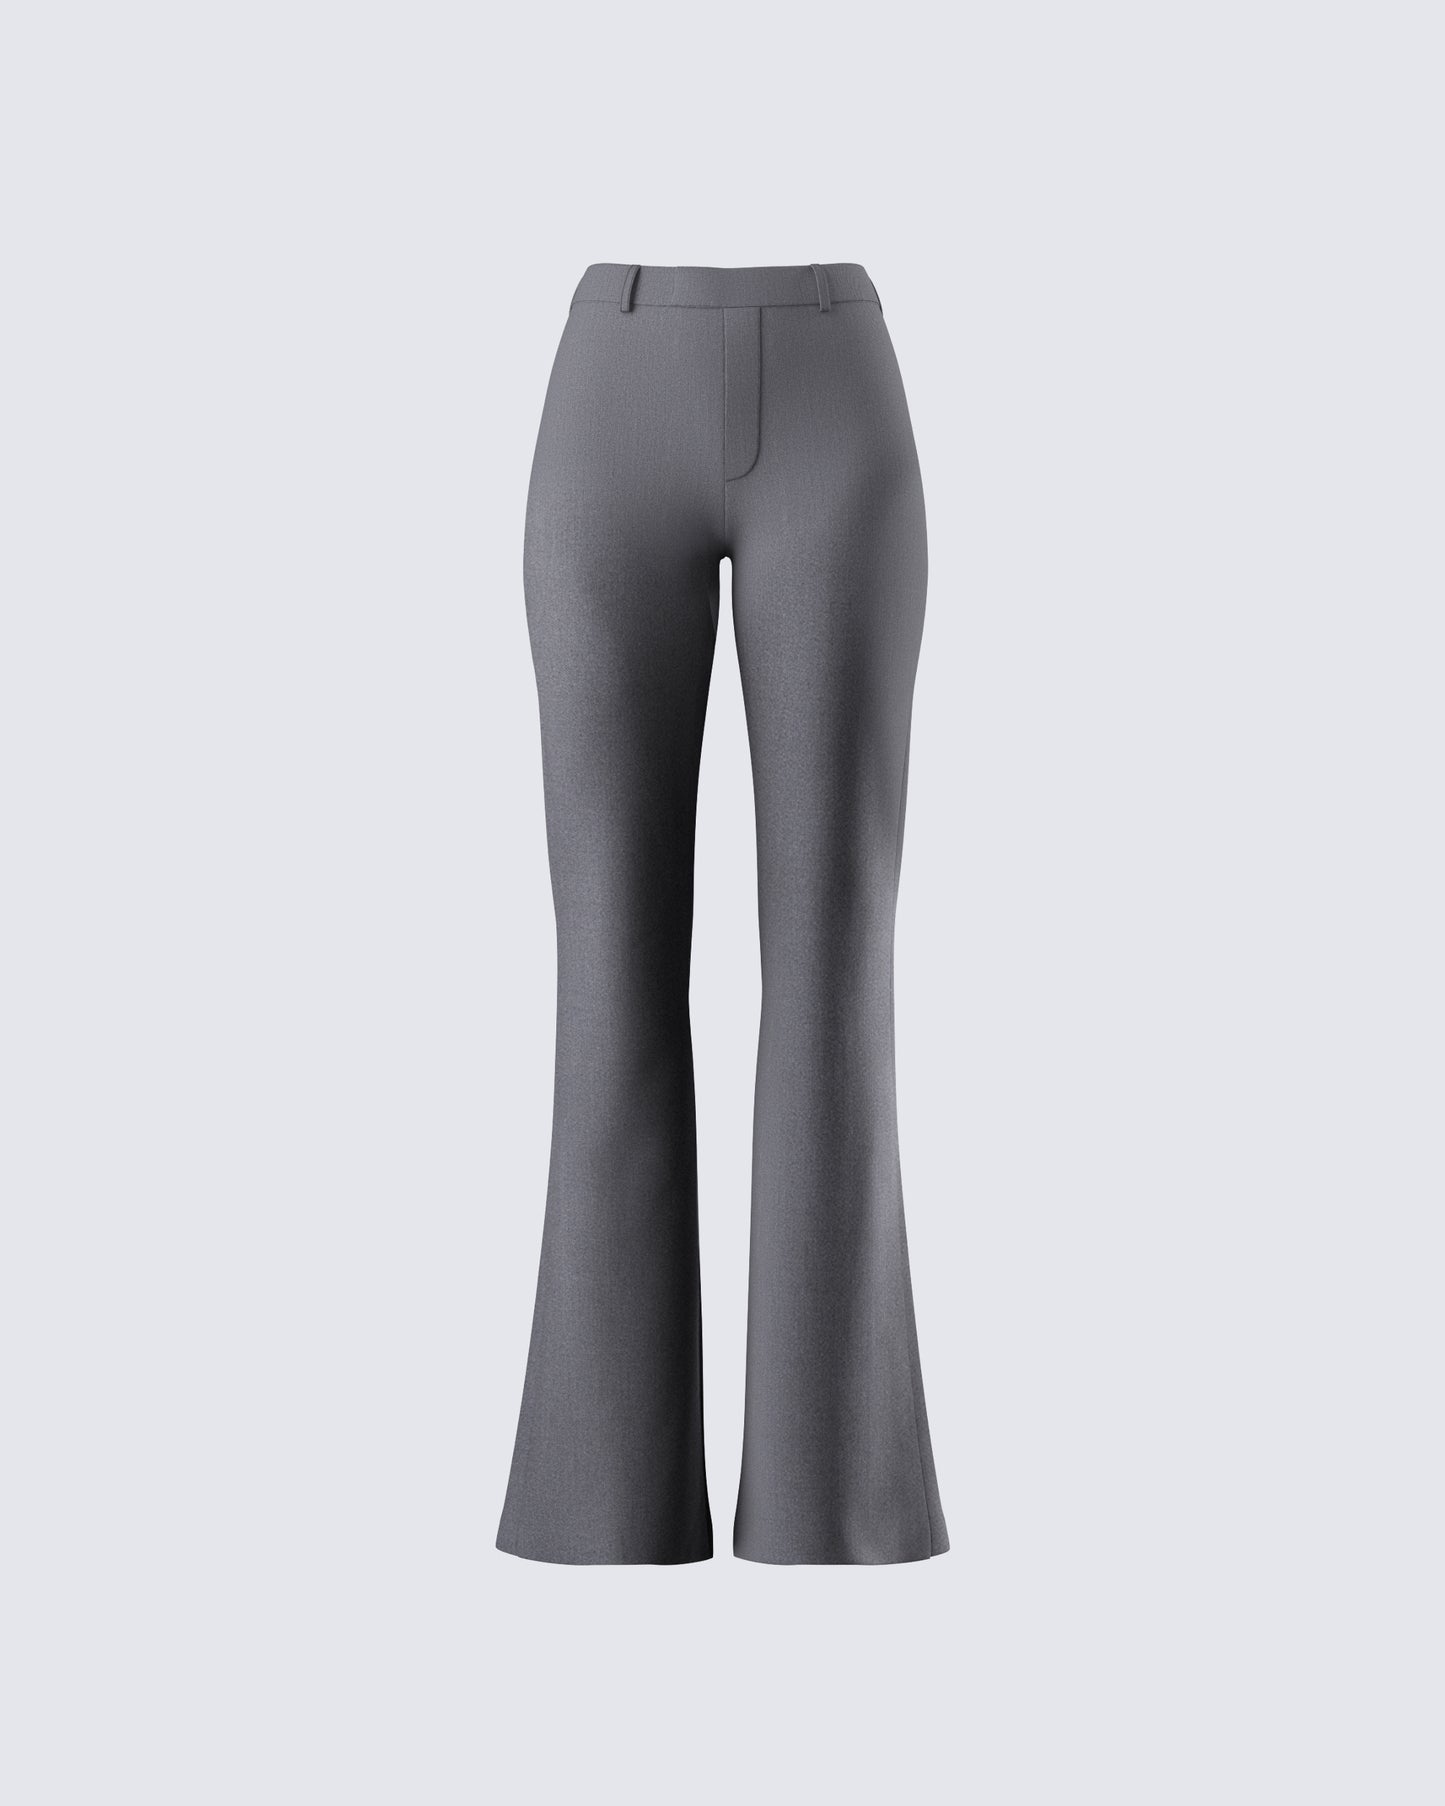 Kimberly Grey Flared Trouser Pant